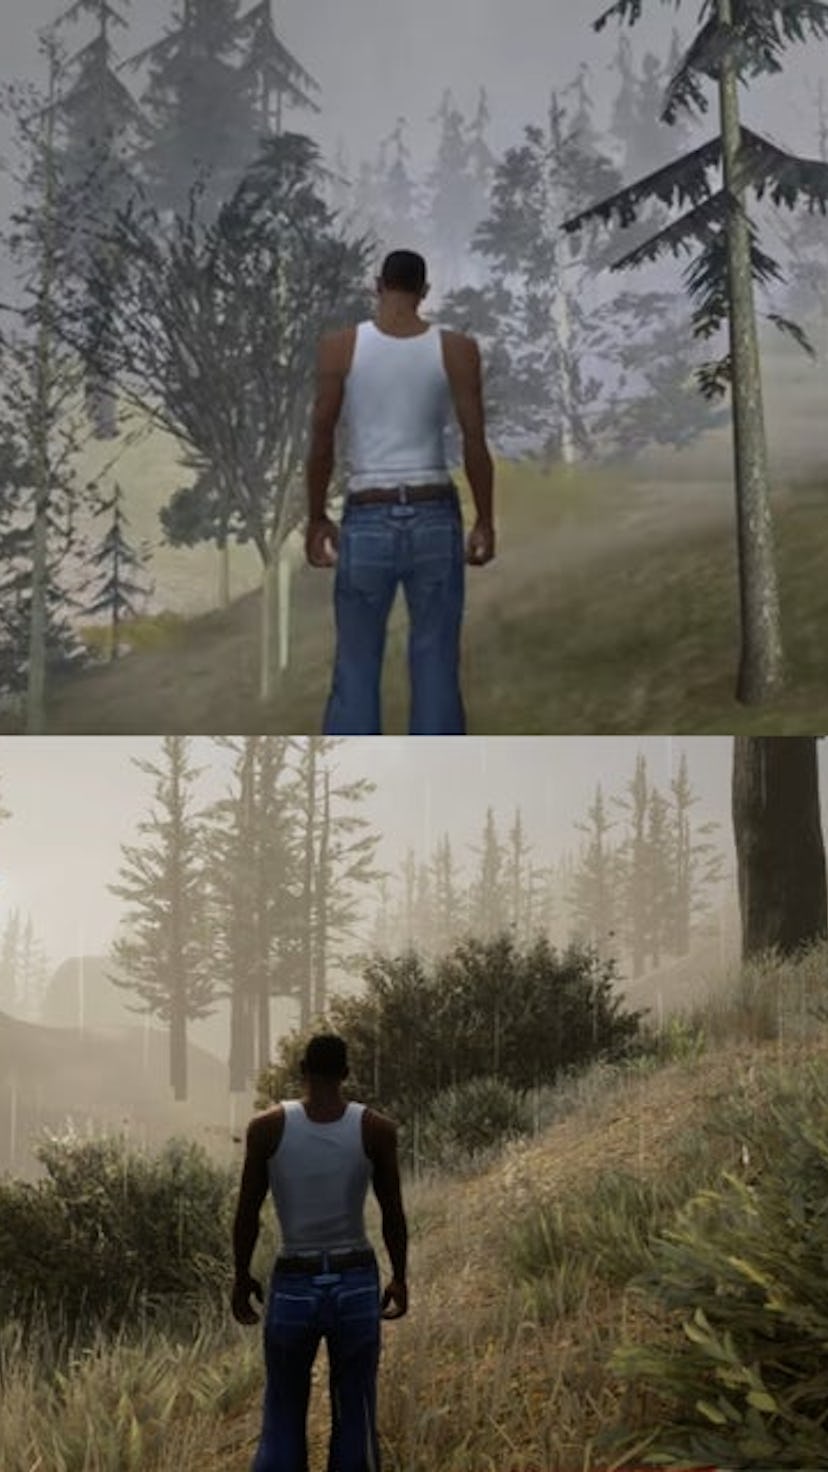 GTA remastered before and after